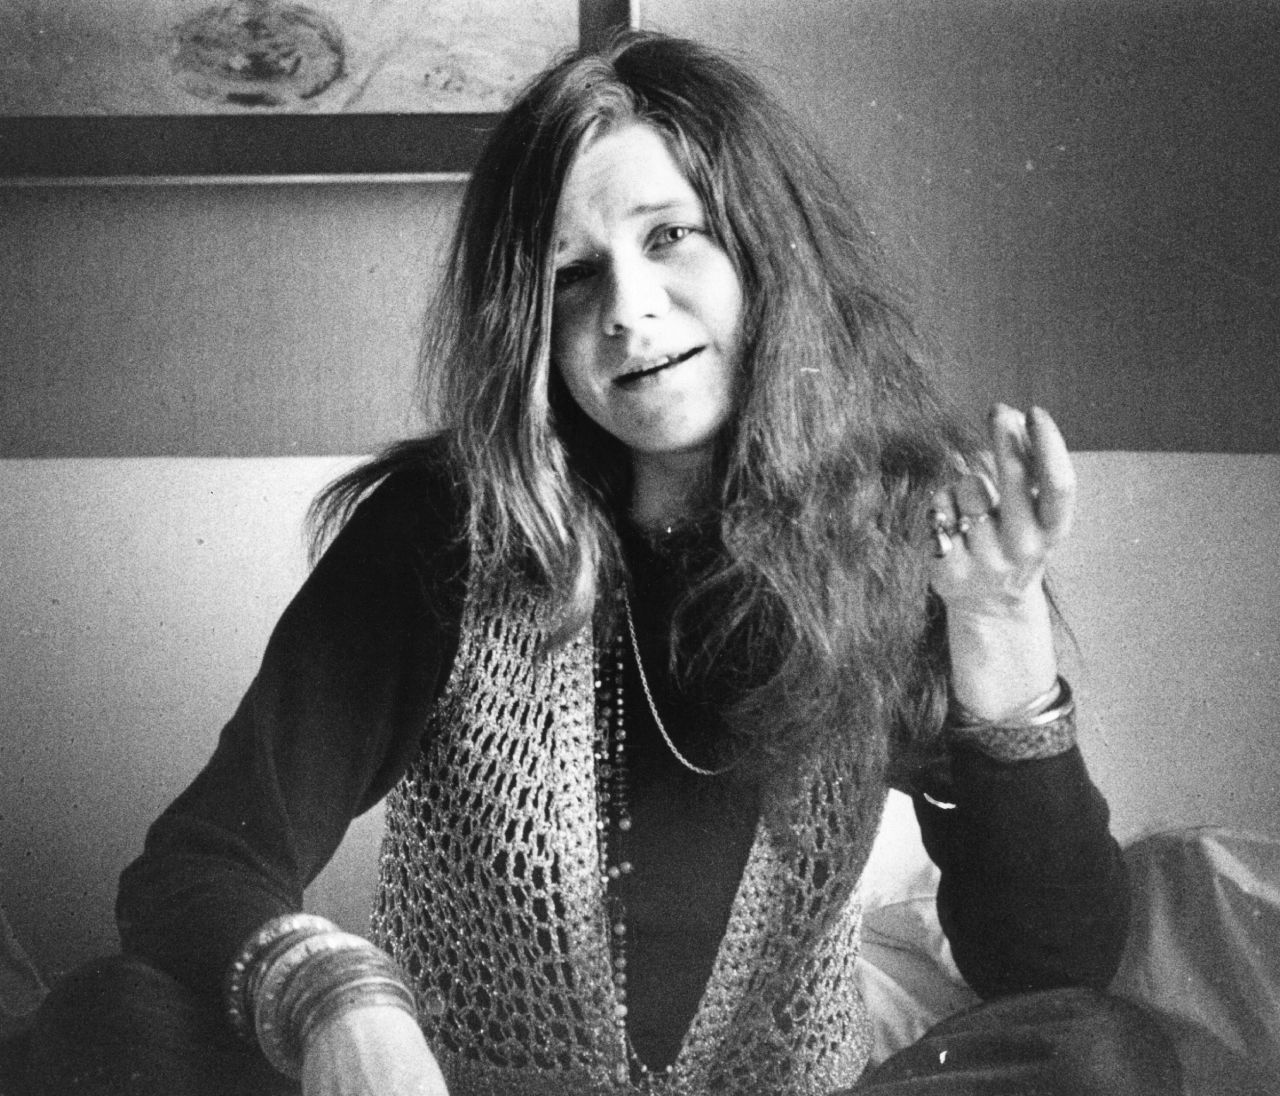 American blues-rock singer Janis Joplin died on October 4, 1970. She was found in her hotel room, dead of a heroin overdose. 